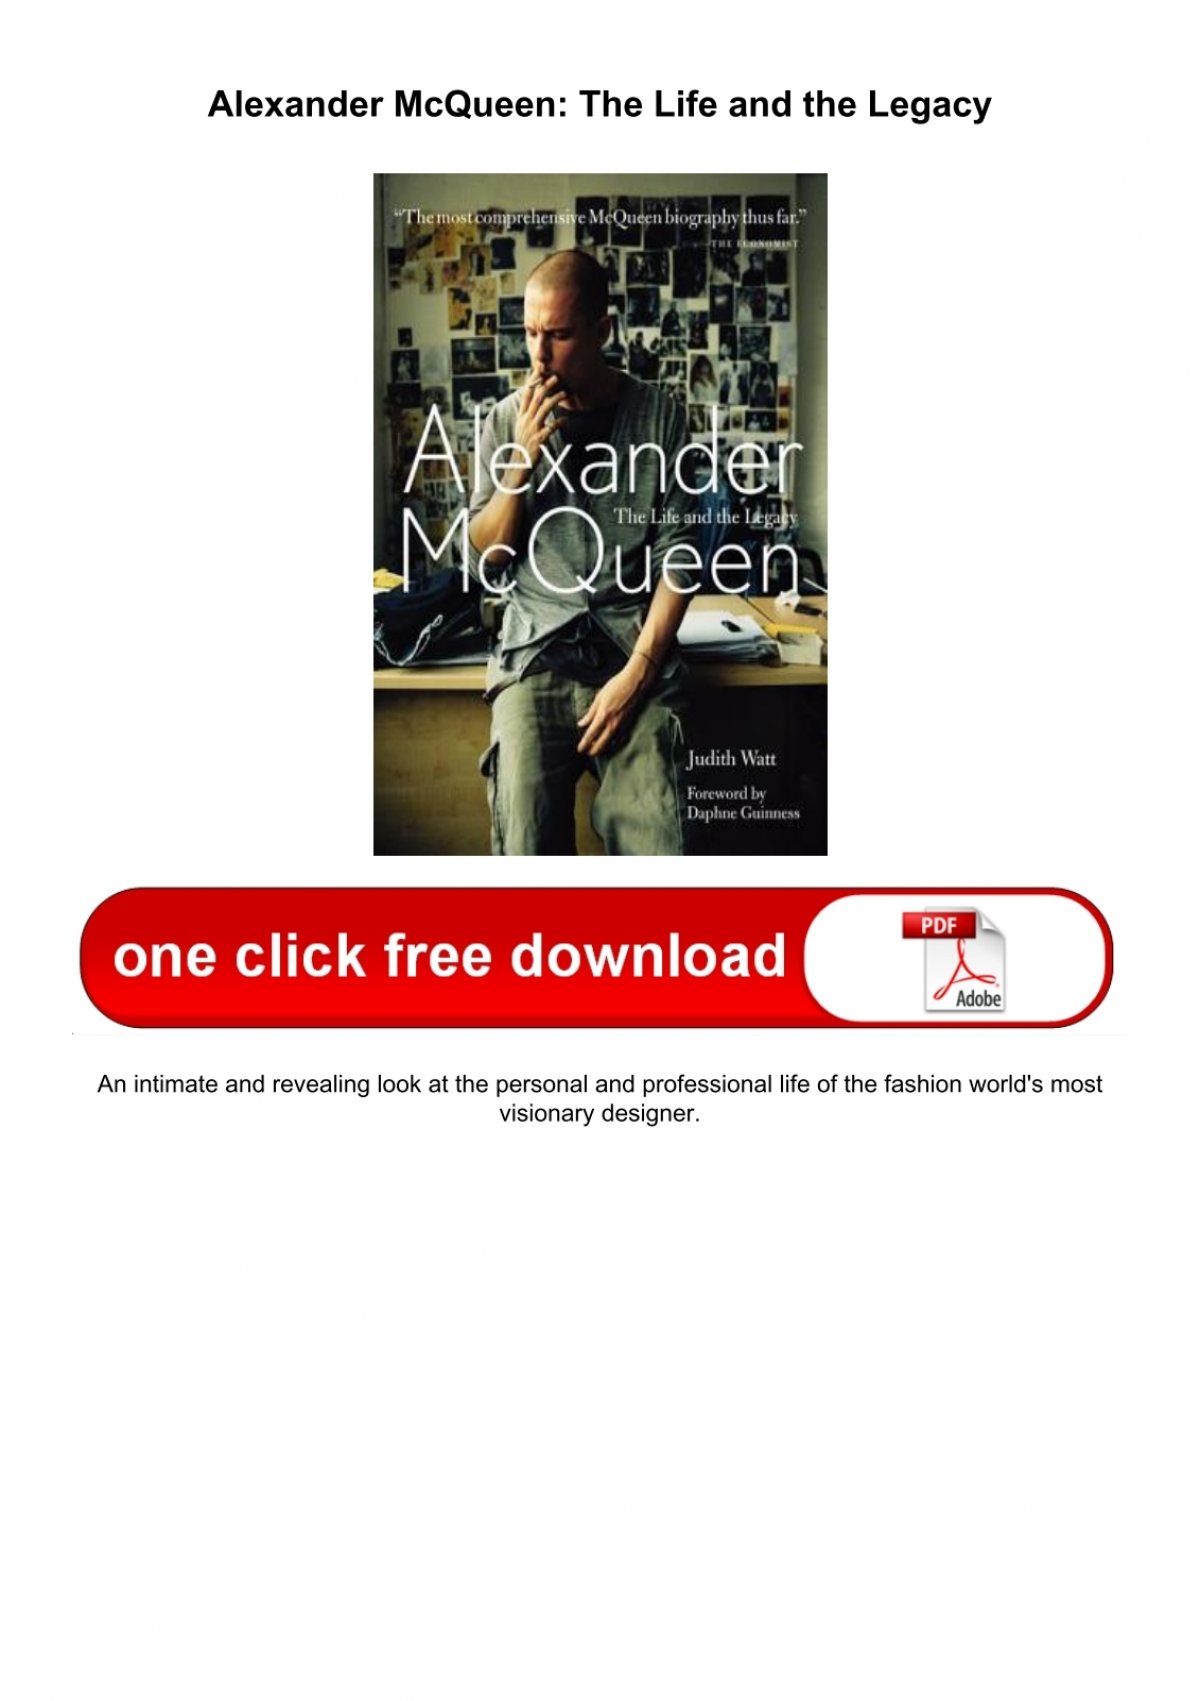 The Life And Legacy Of Alexander Mcqueen - A&E Magazine